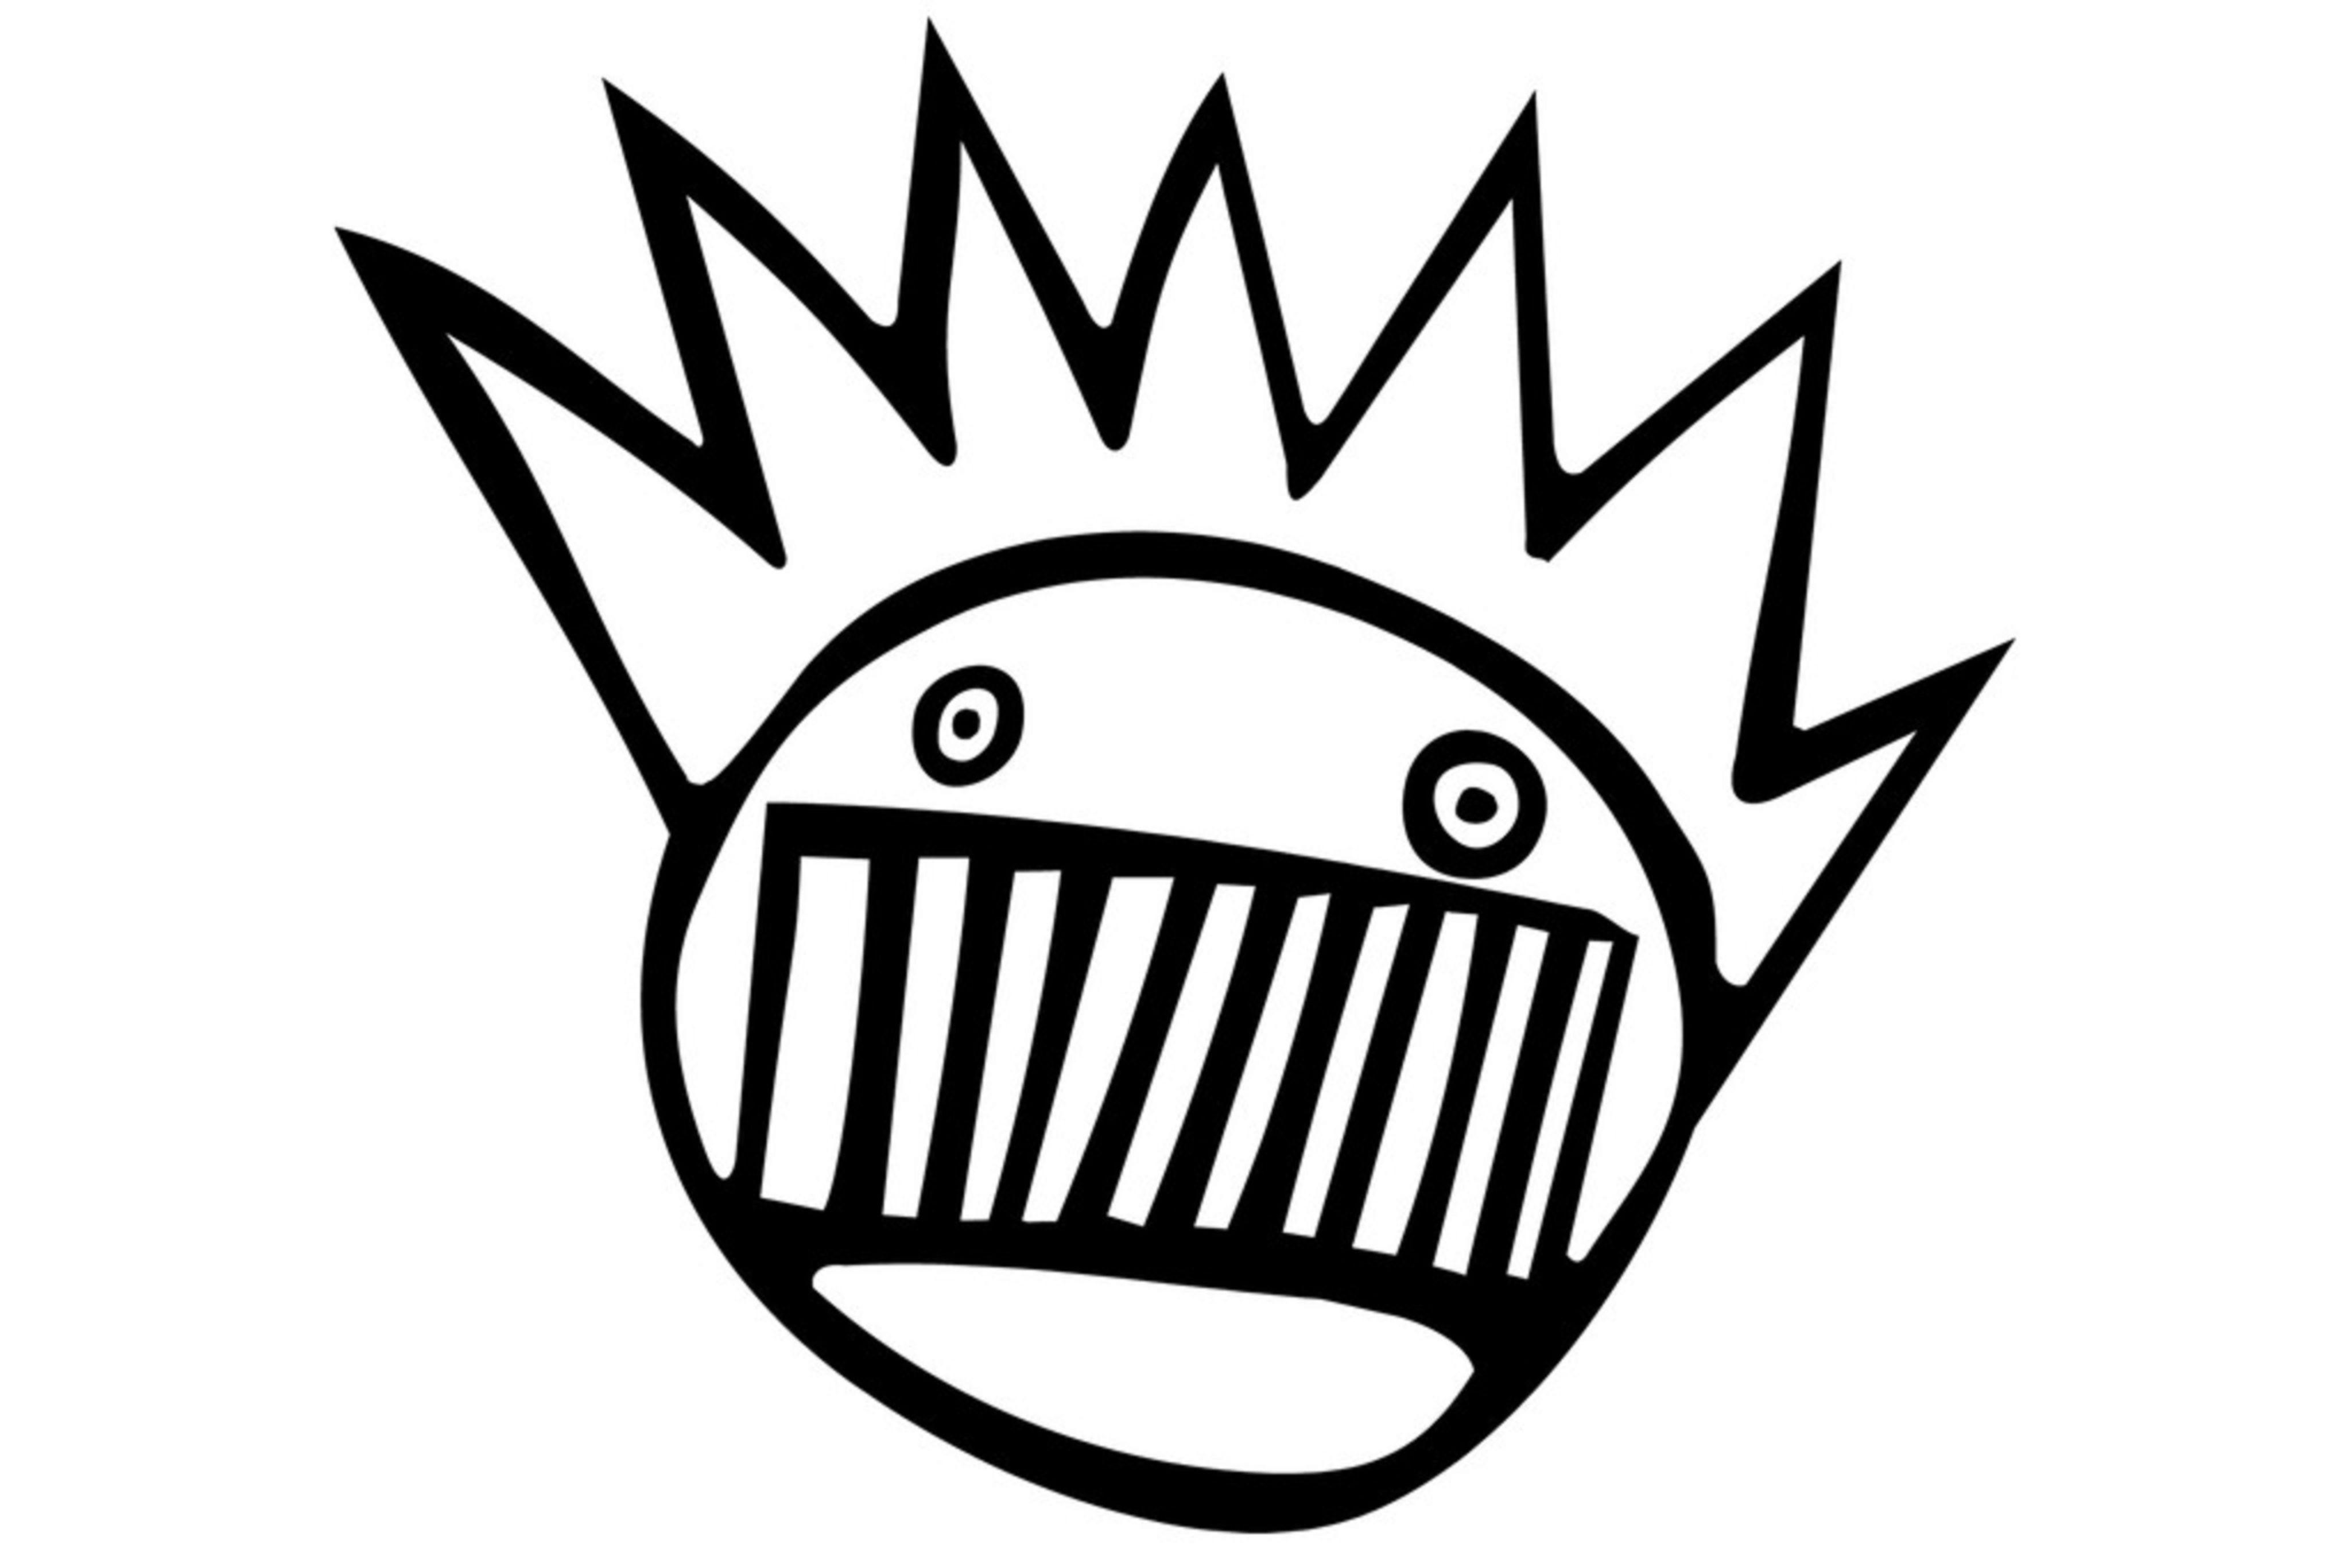 Ween Logo - Ween to play the Fillmore Miami Beach